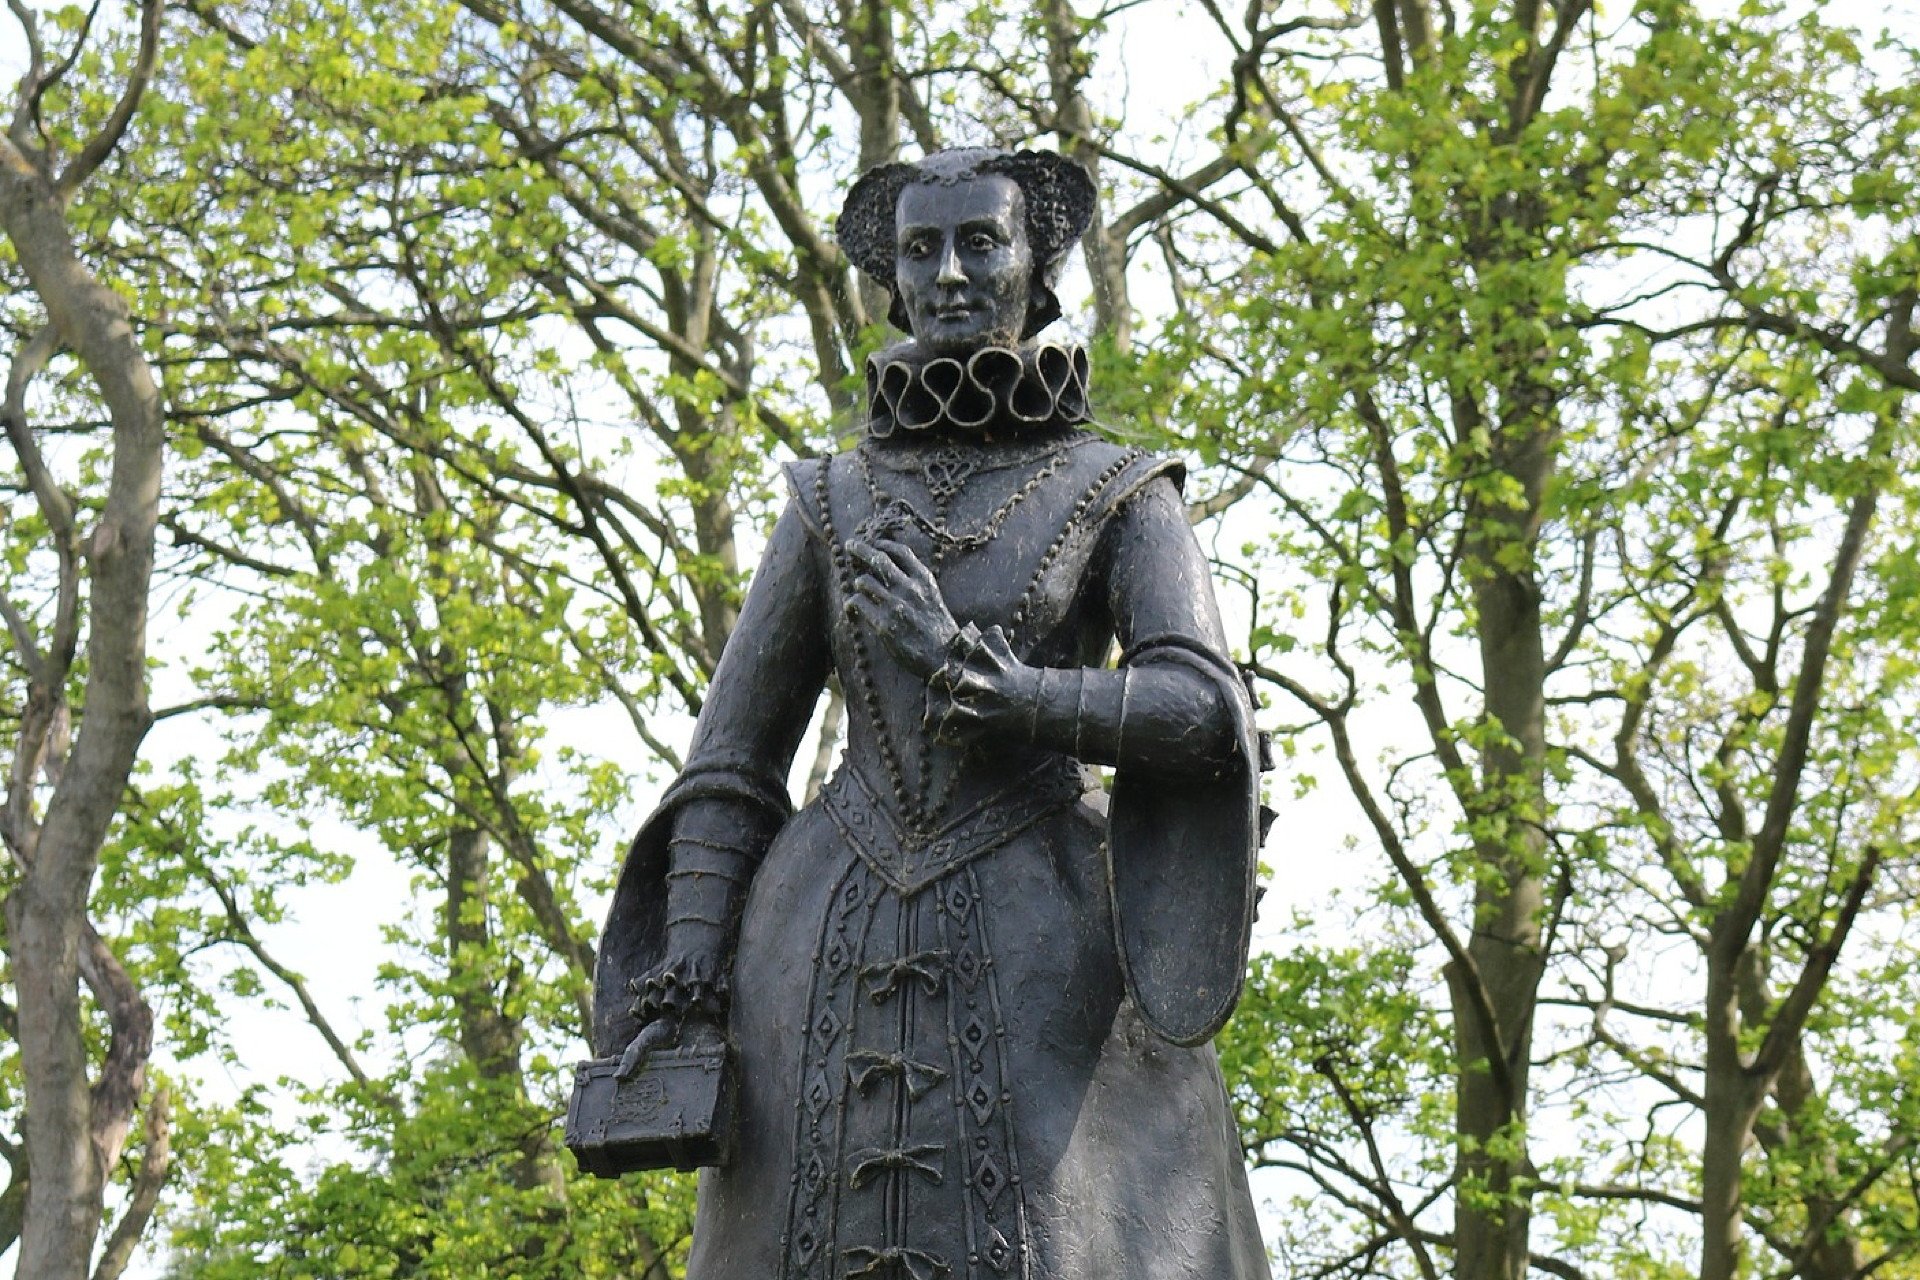 Statue of Mary Queen of Scots